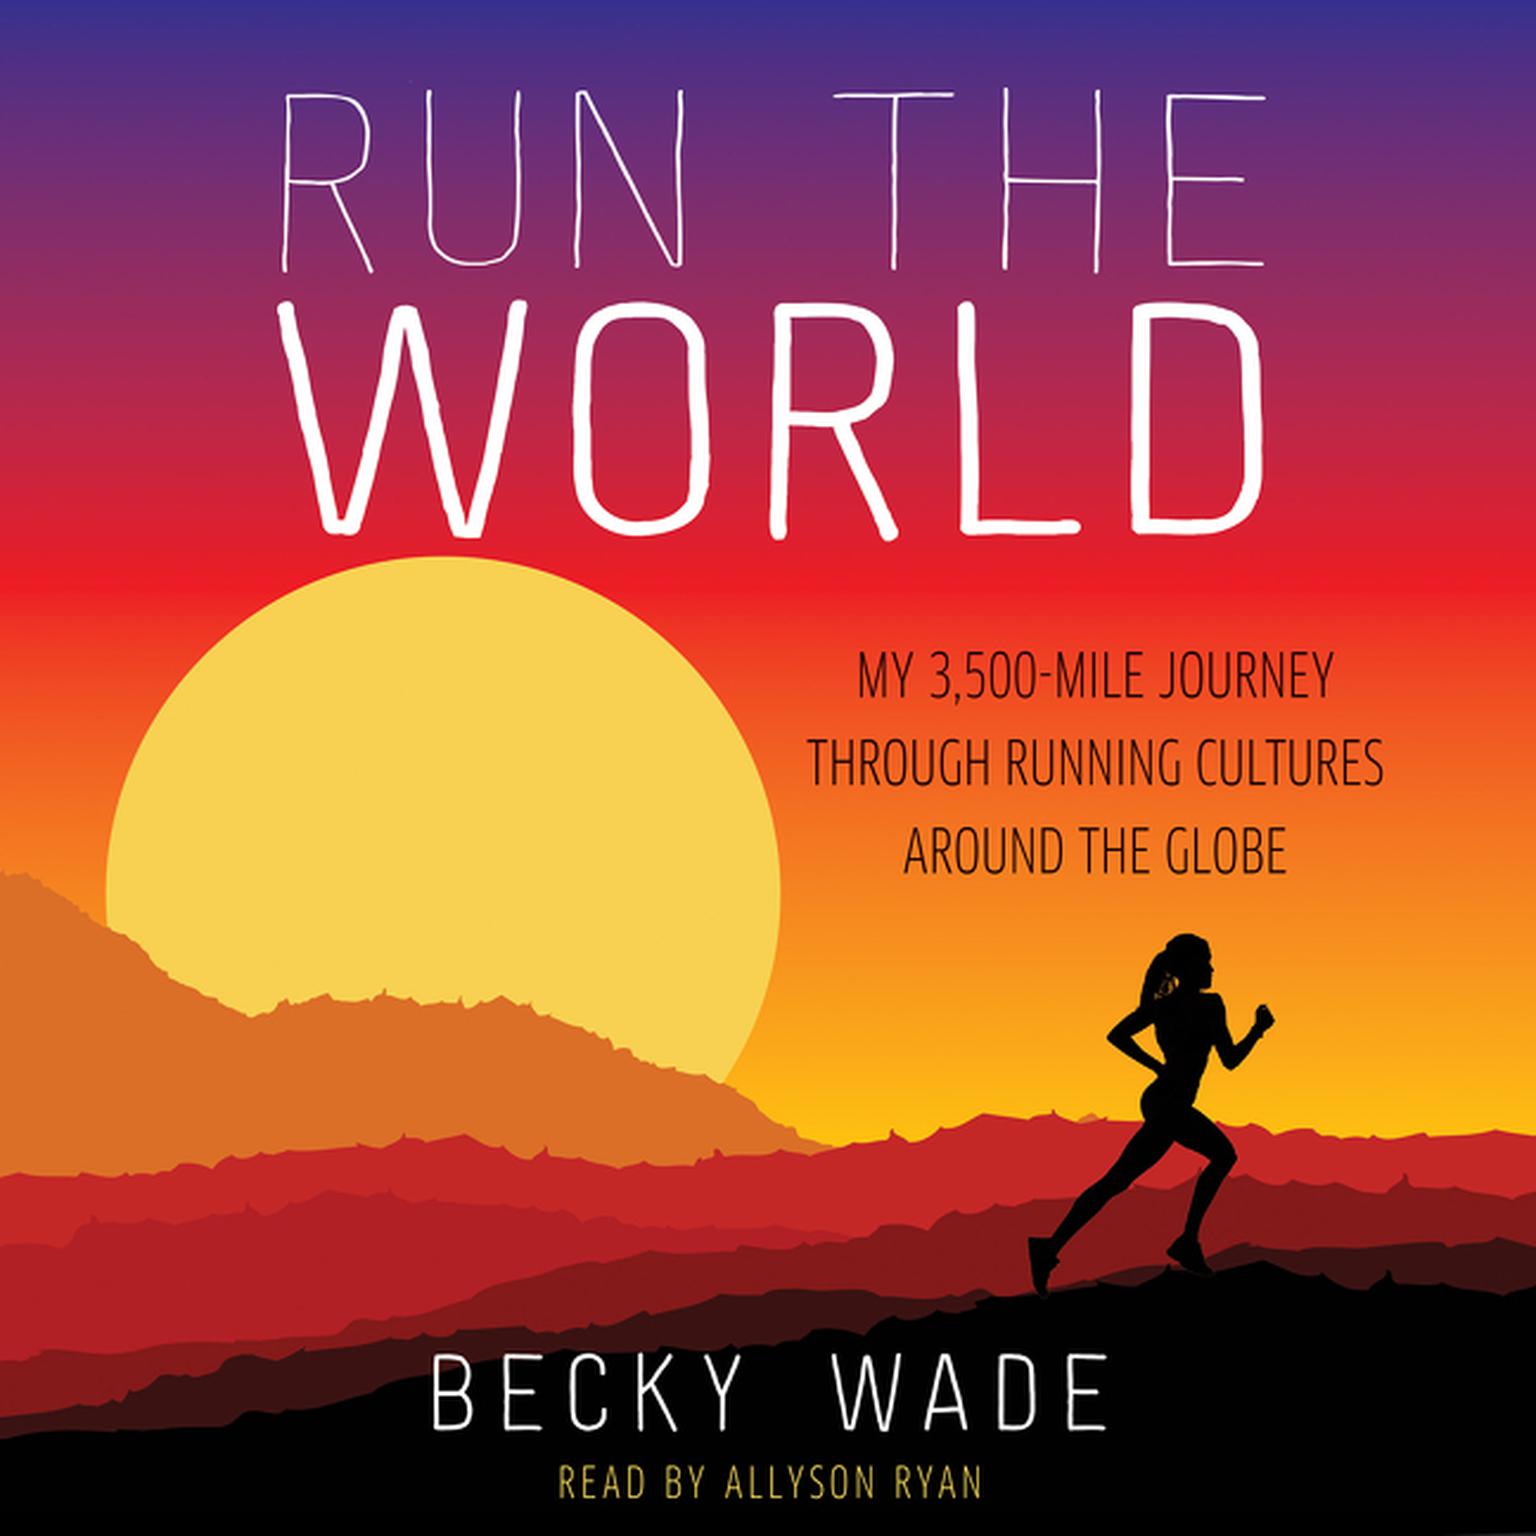 Run the World: My 3,500-Mile Journey Through Running Cultures Around the Globe Audiobook, by Becky Wade